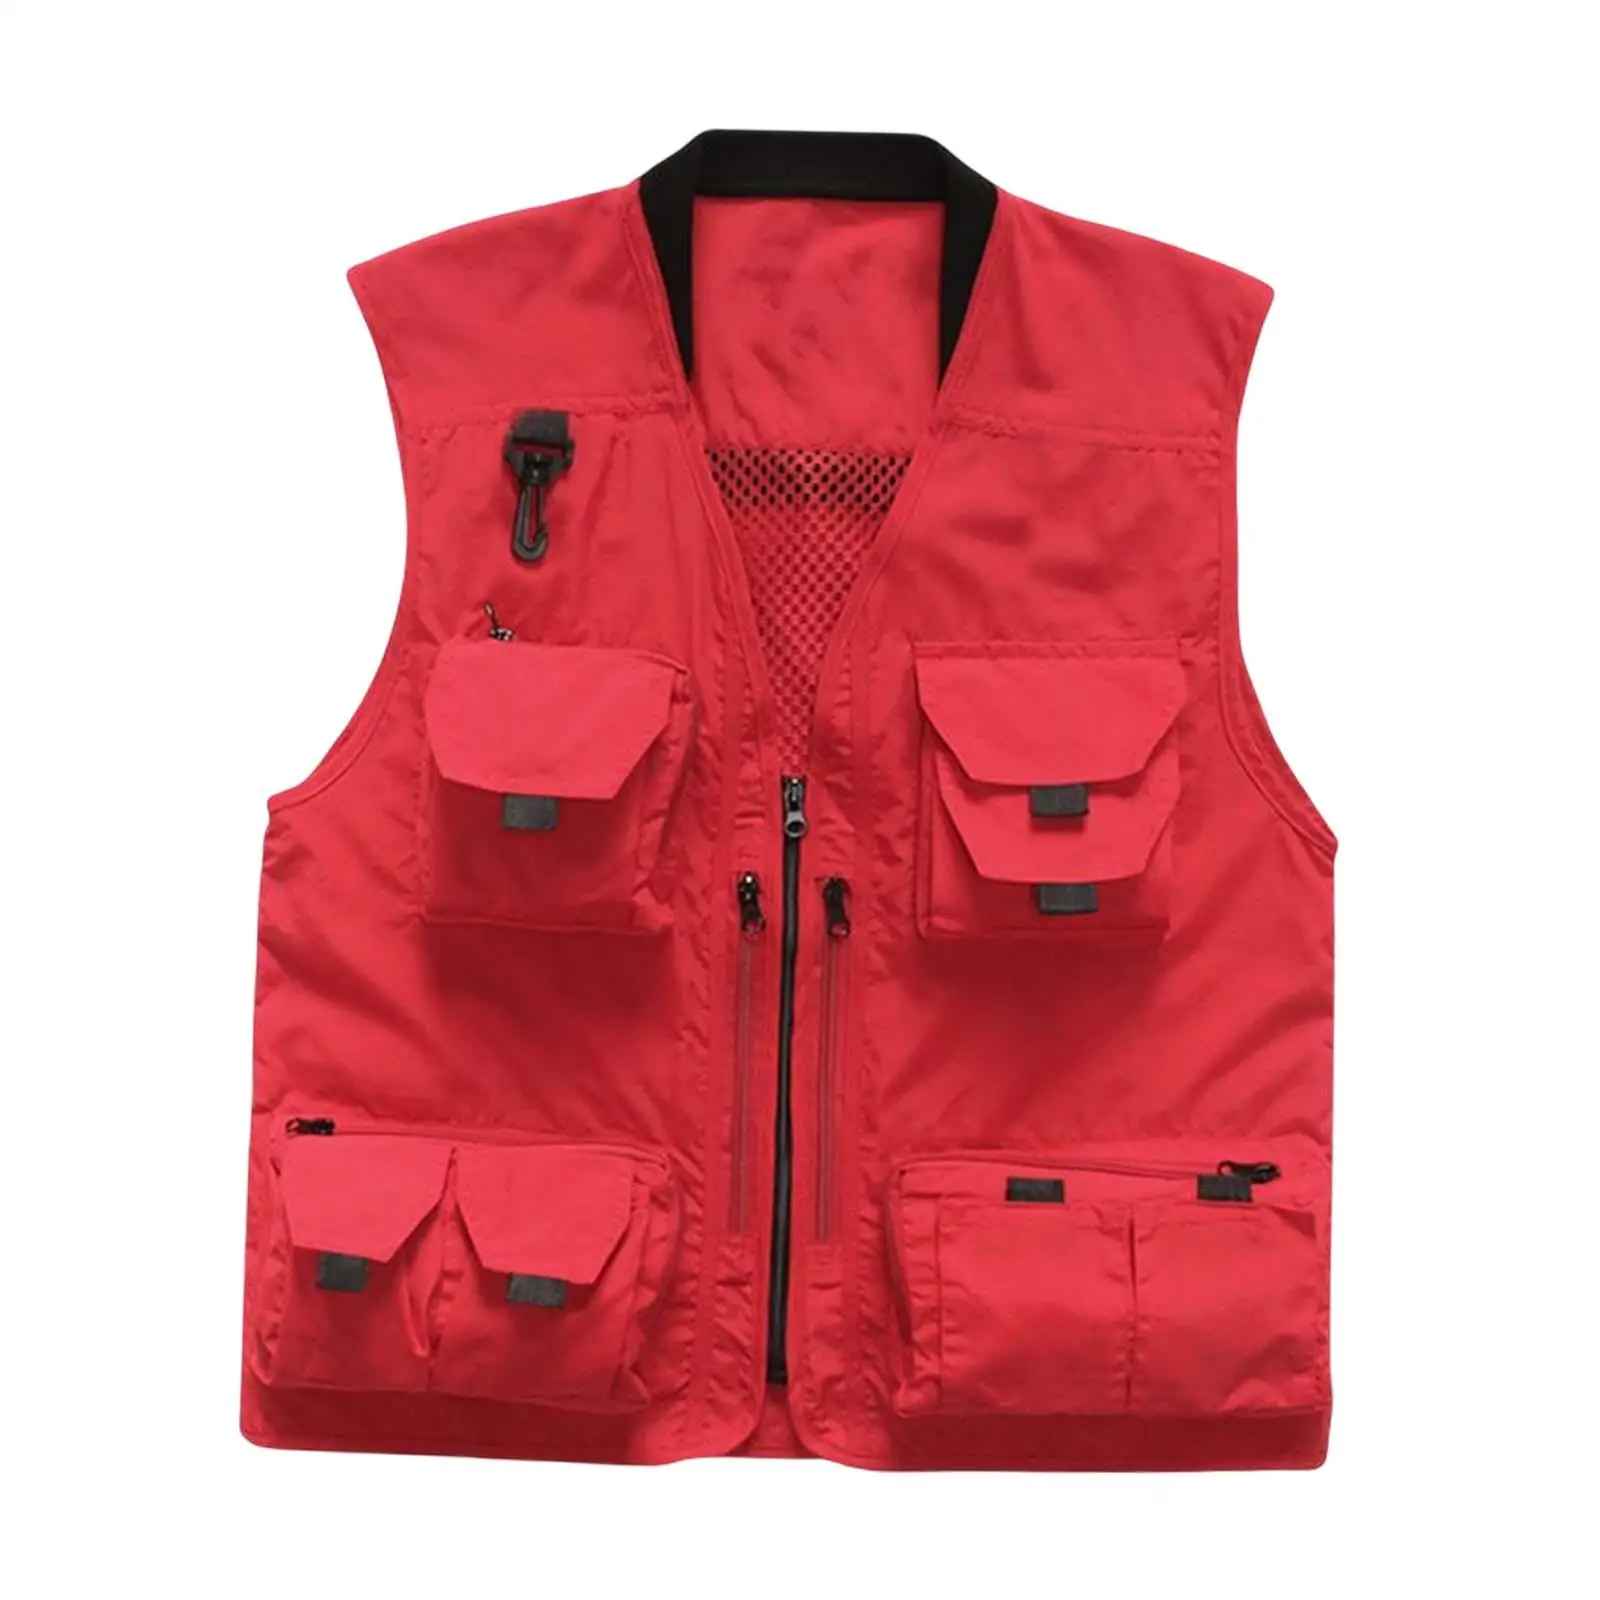 Casual Fishing Vest Mesh with Pockets Clothes Costume Photography Lightweight Mens Jacket for Outdoor Activities Climbing Sports